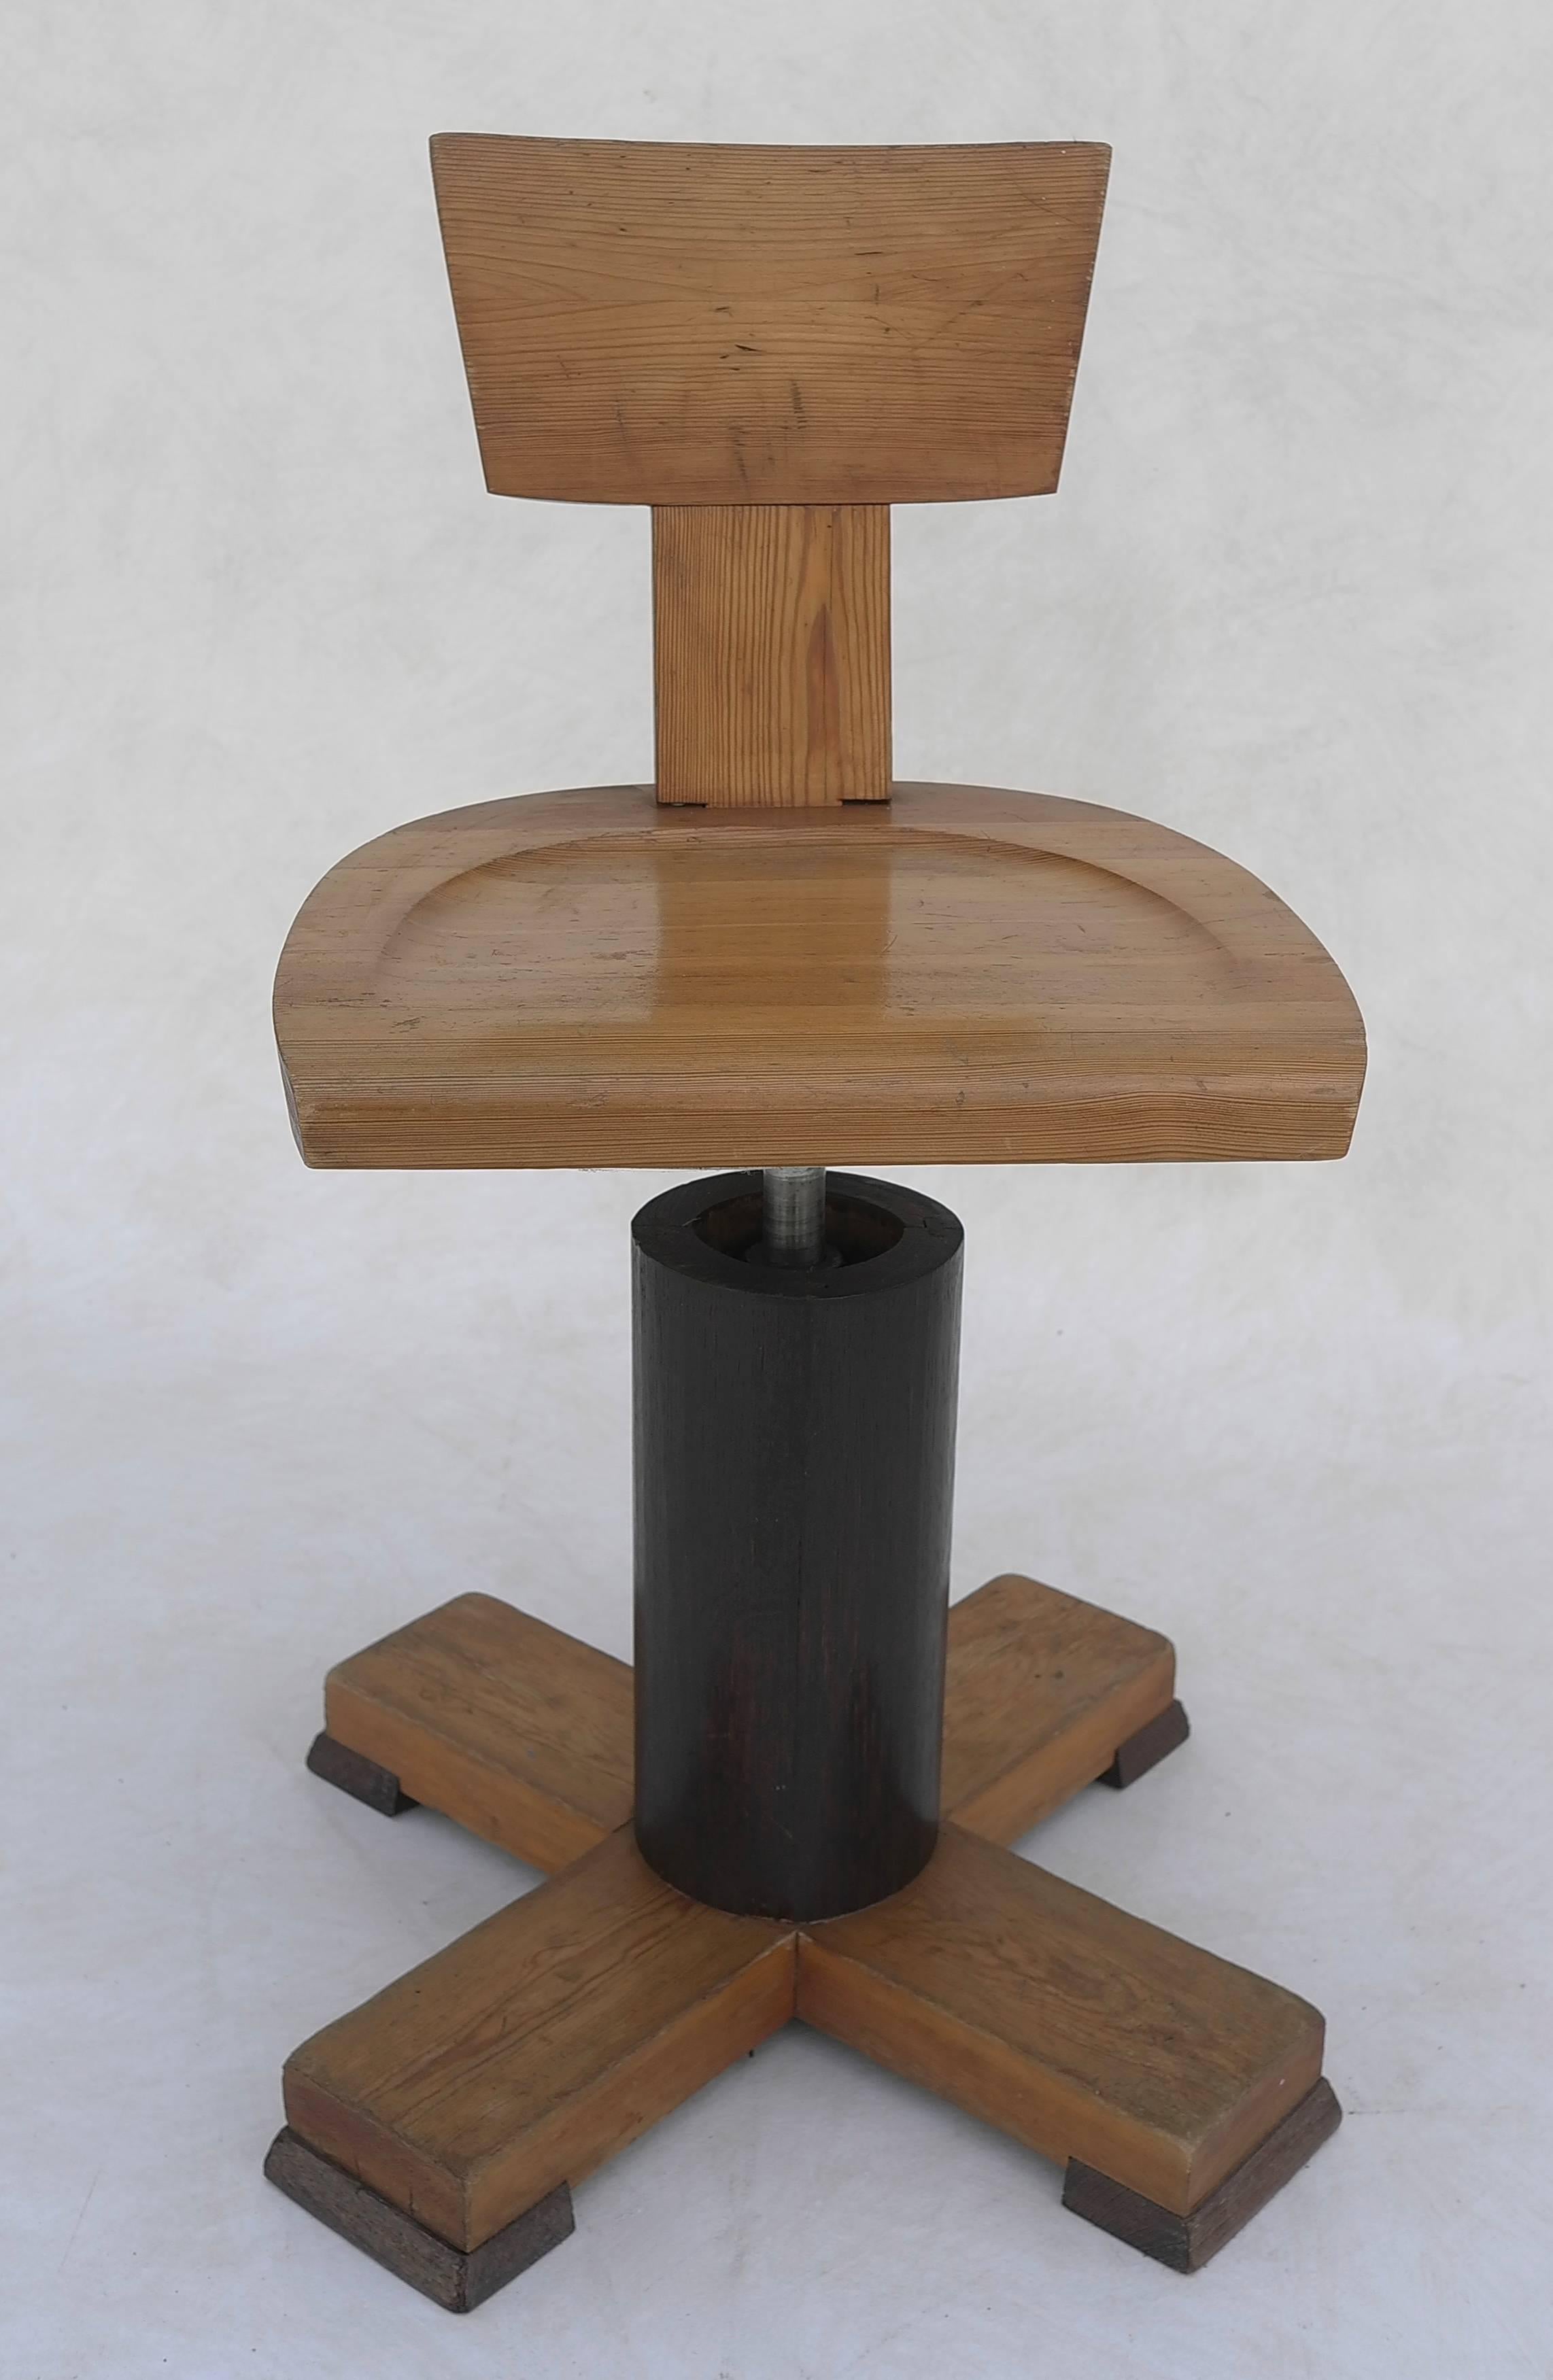 Rare Jacob Kielland-Brandt office chair for I. Christiansen, Denmark, 1960.
Made from pinewood in combination with wenge.

This stool is adjustable in height.